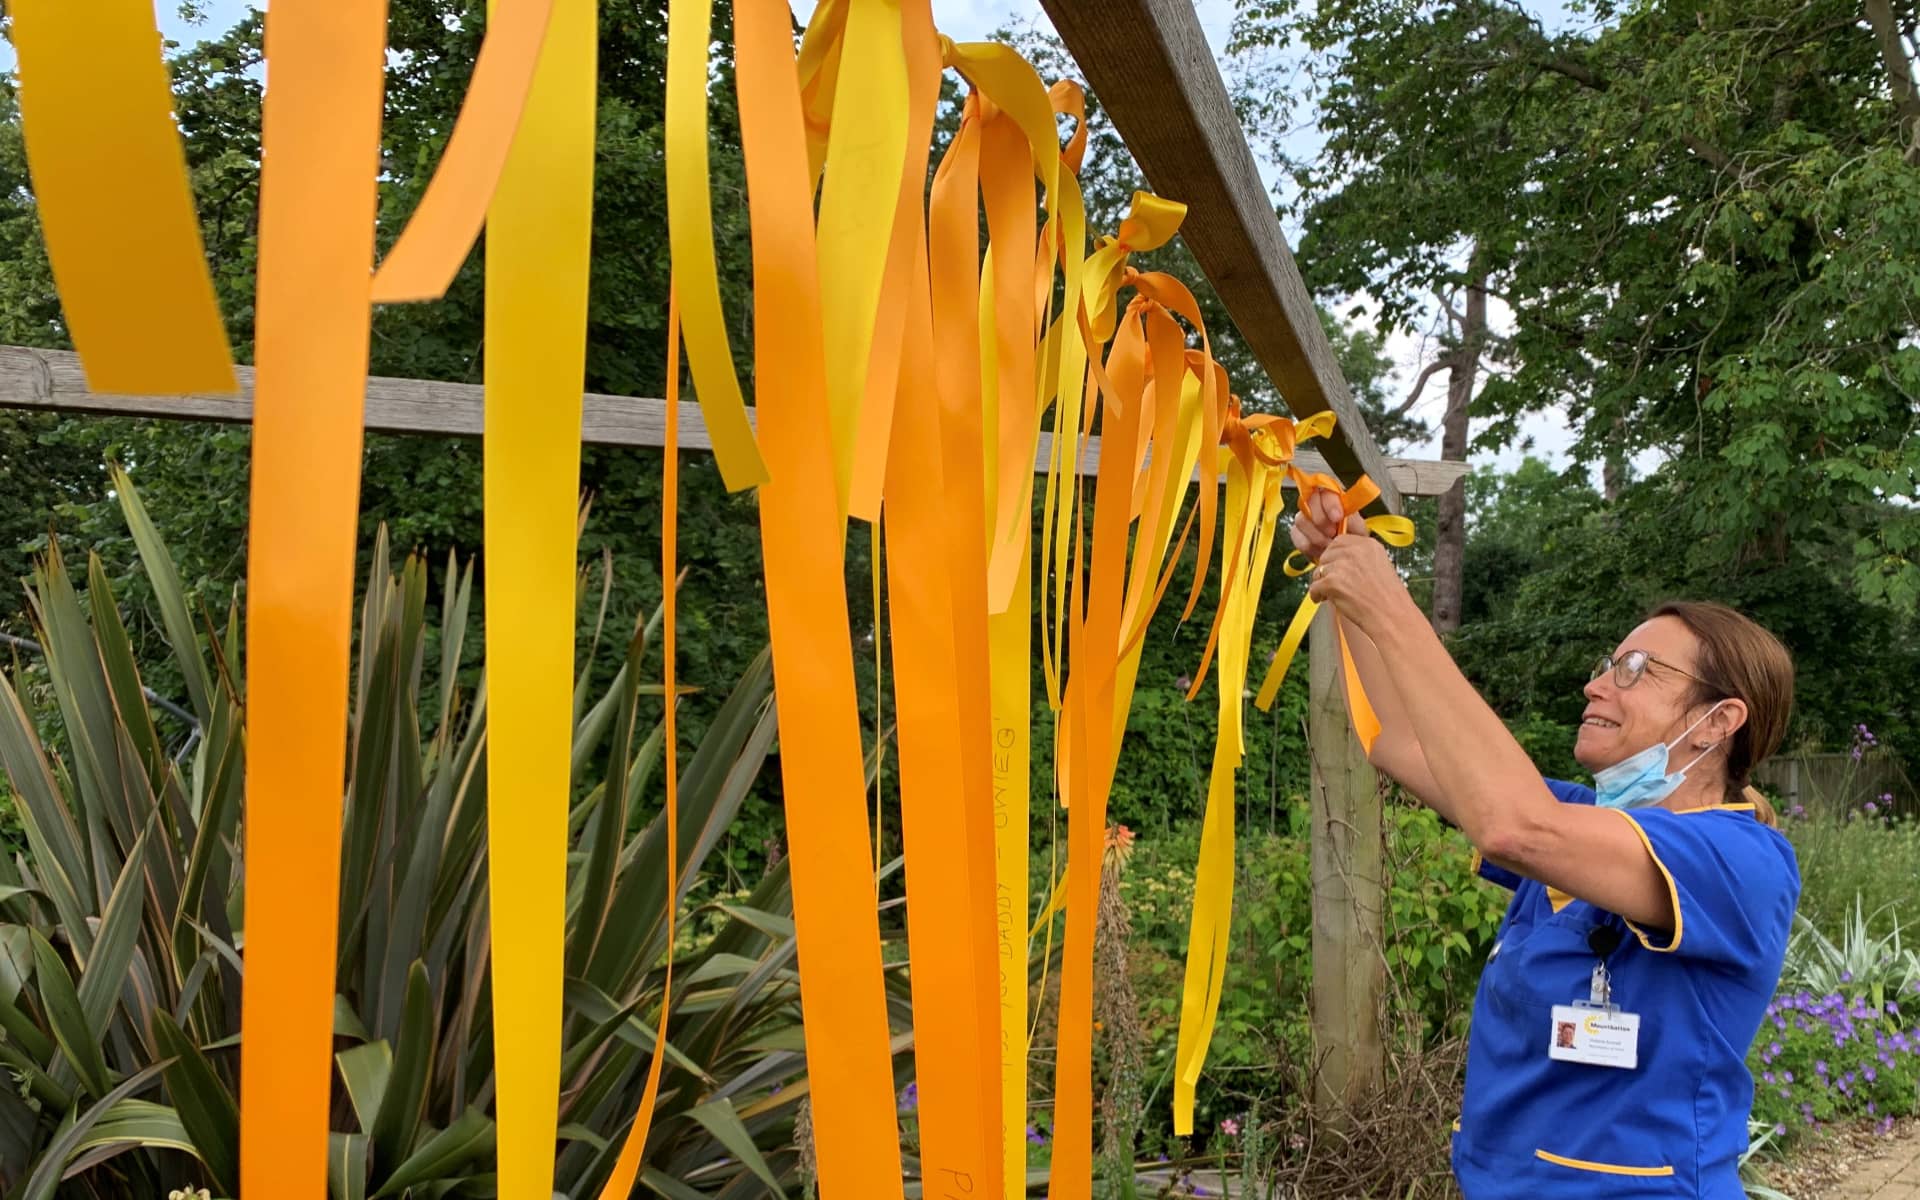 Vicky adding ribbons to the garden display